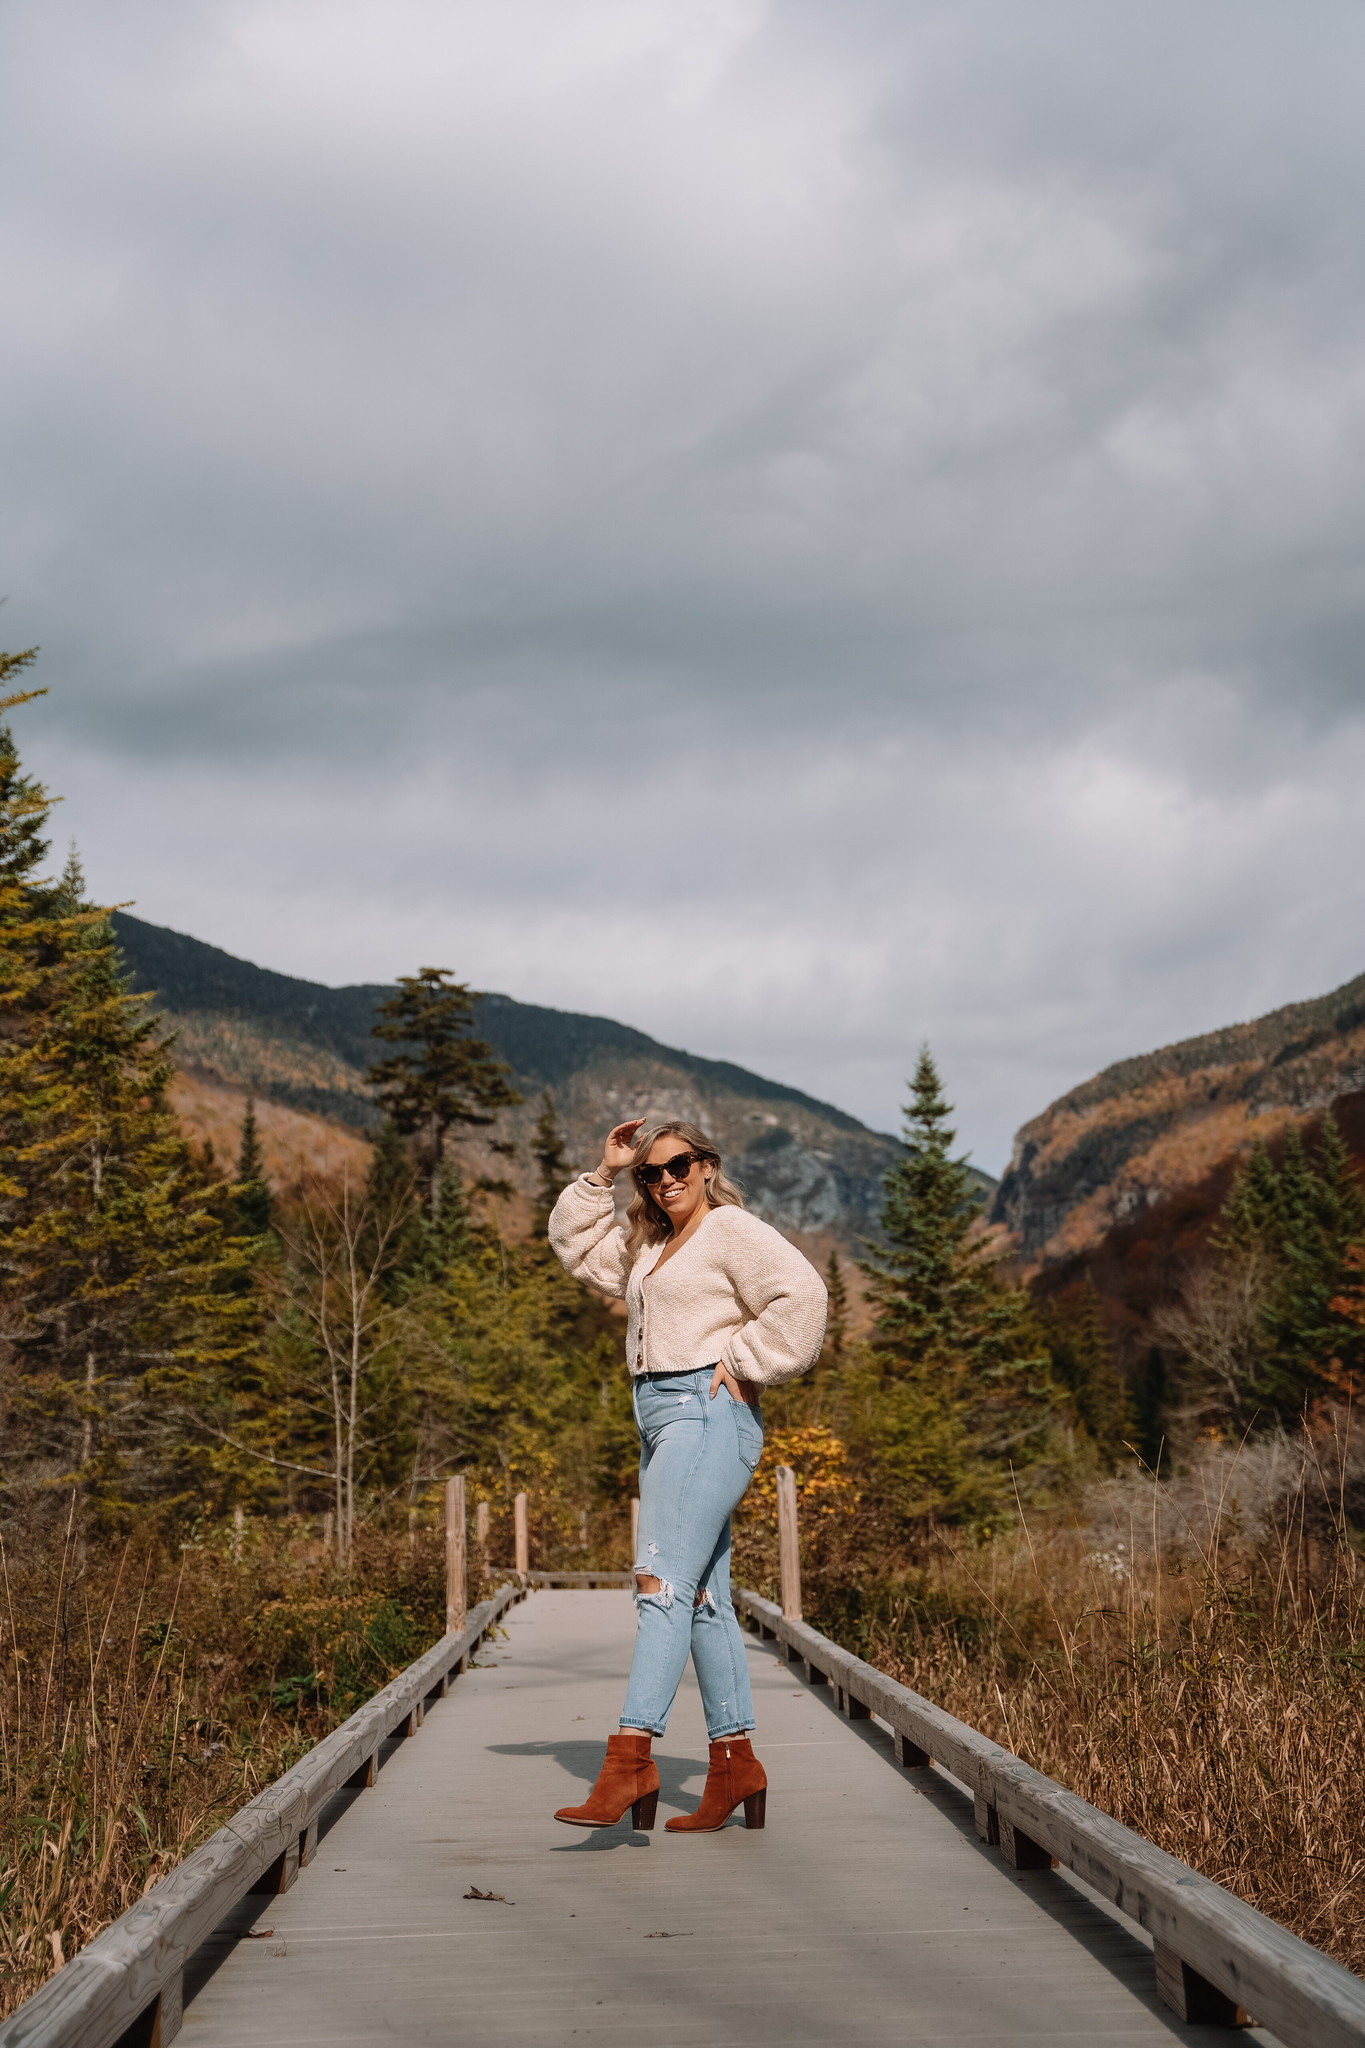 Chunky Cardigan & American Eagle Mom Jeans | Stowe Mountain Resort | What to Wear in Vermont in the Fall | Vermont Packing List for Fall | What to Wear in Vermont in October | What to Wear on a Fall Vacation | Fall Outfits